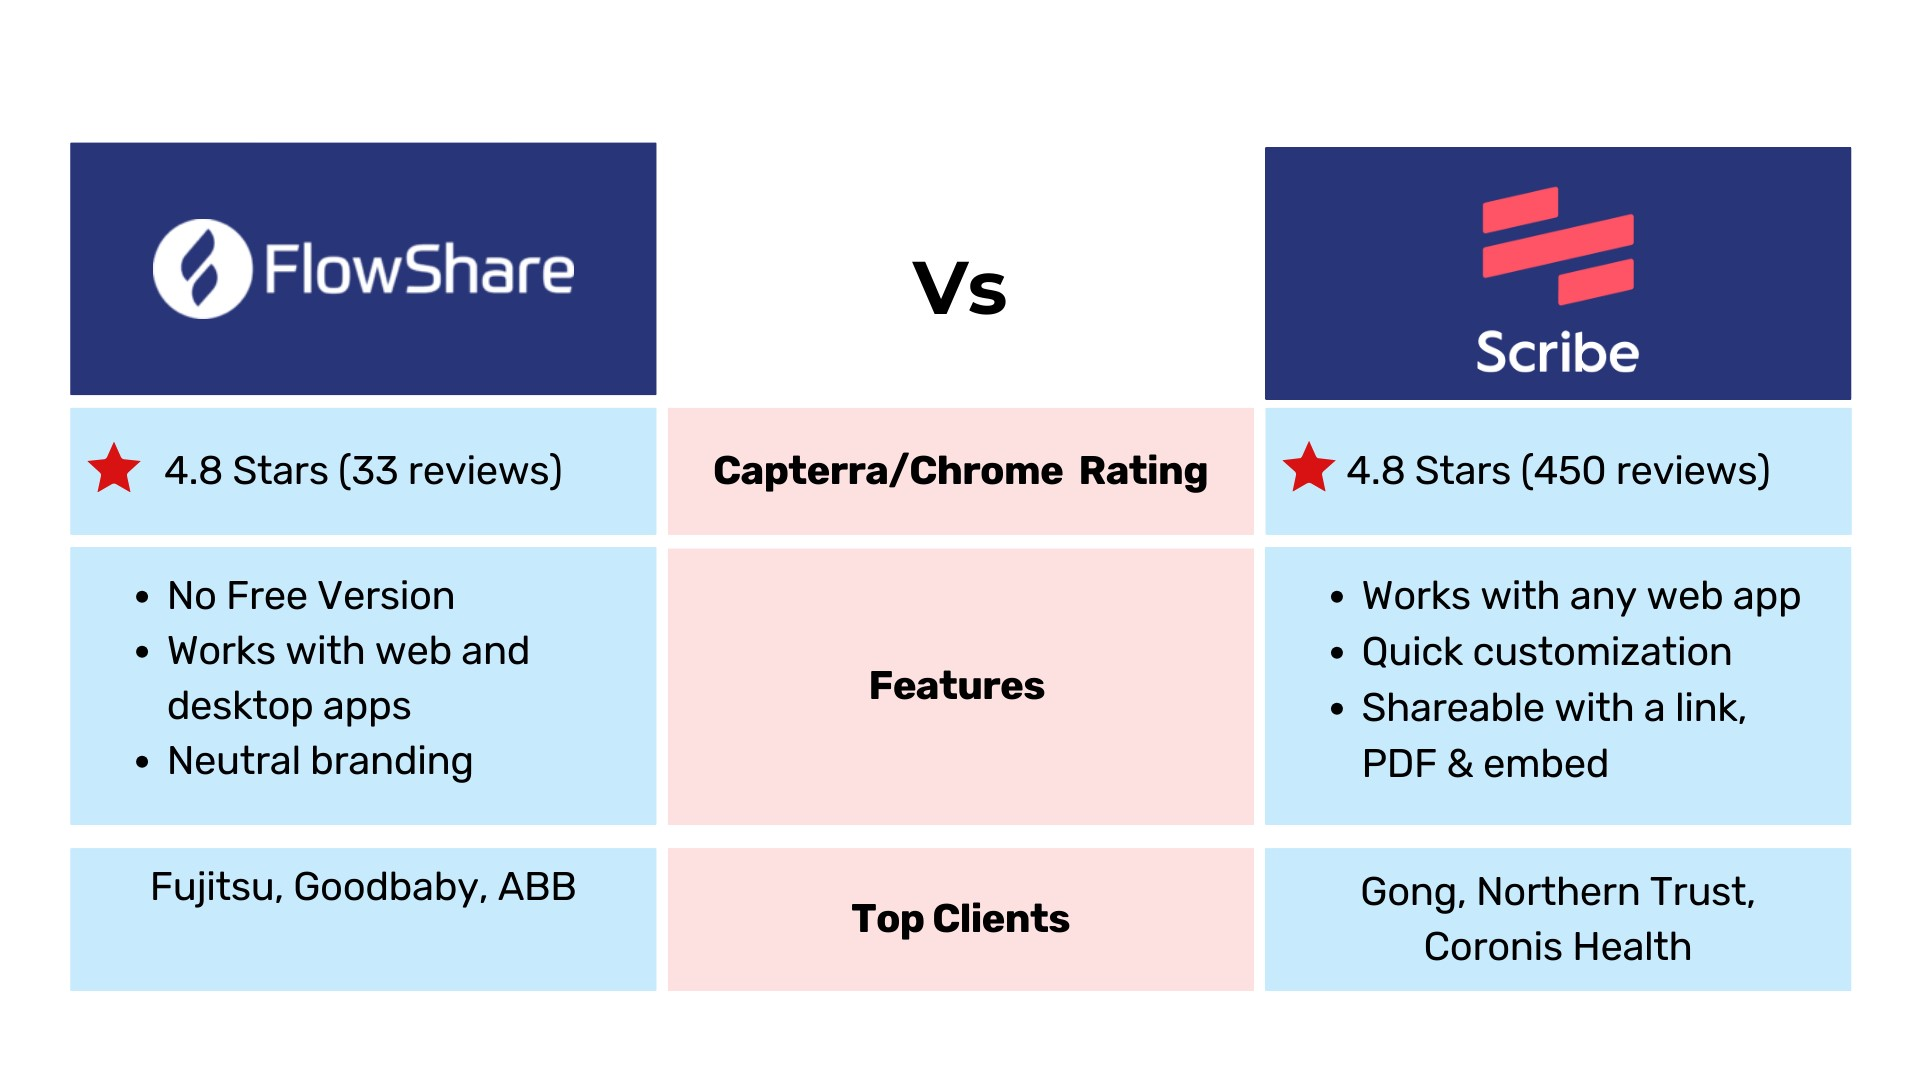 Flowshare Vs Scribe comparison table with rating, features, top clients